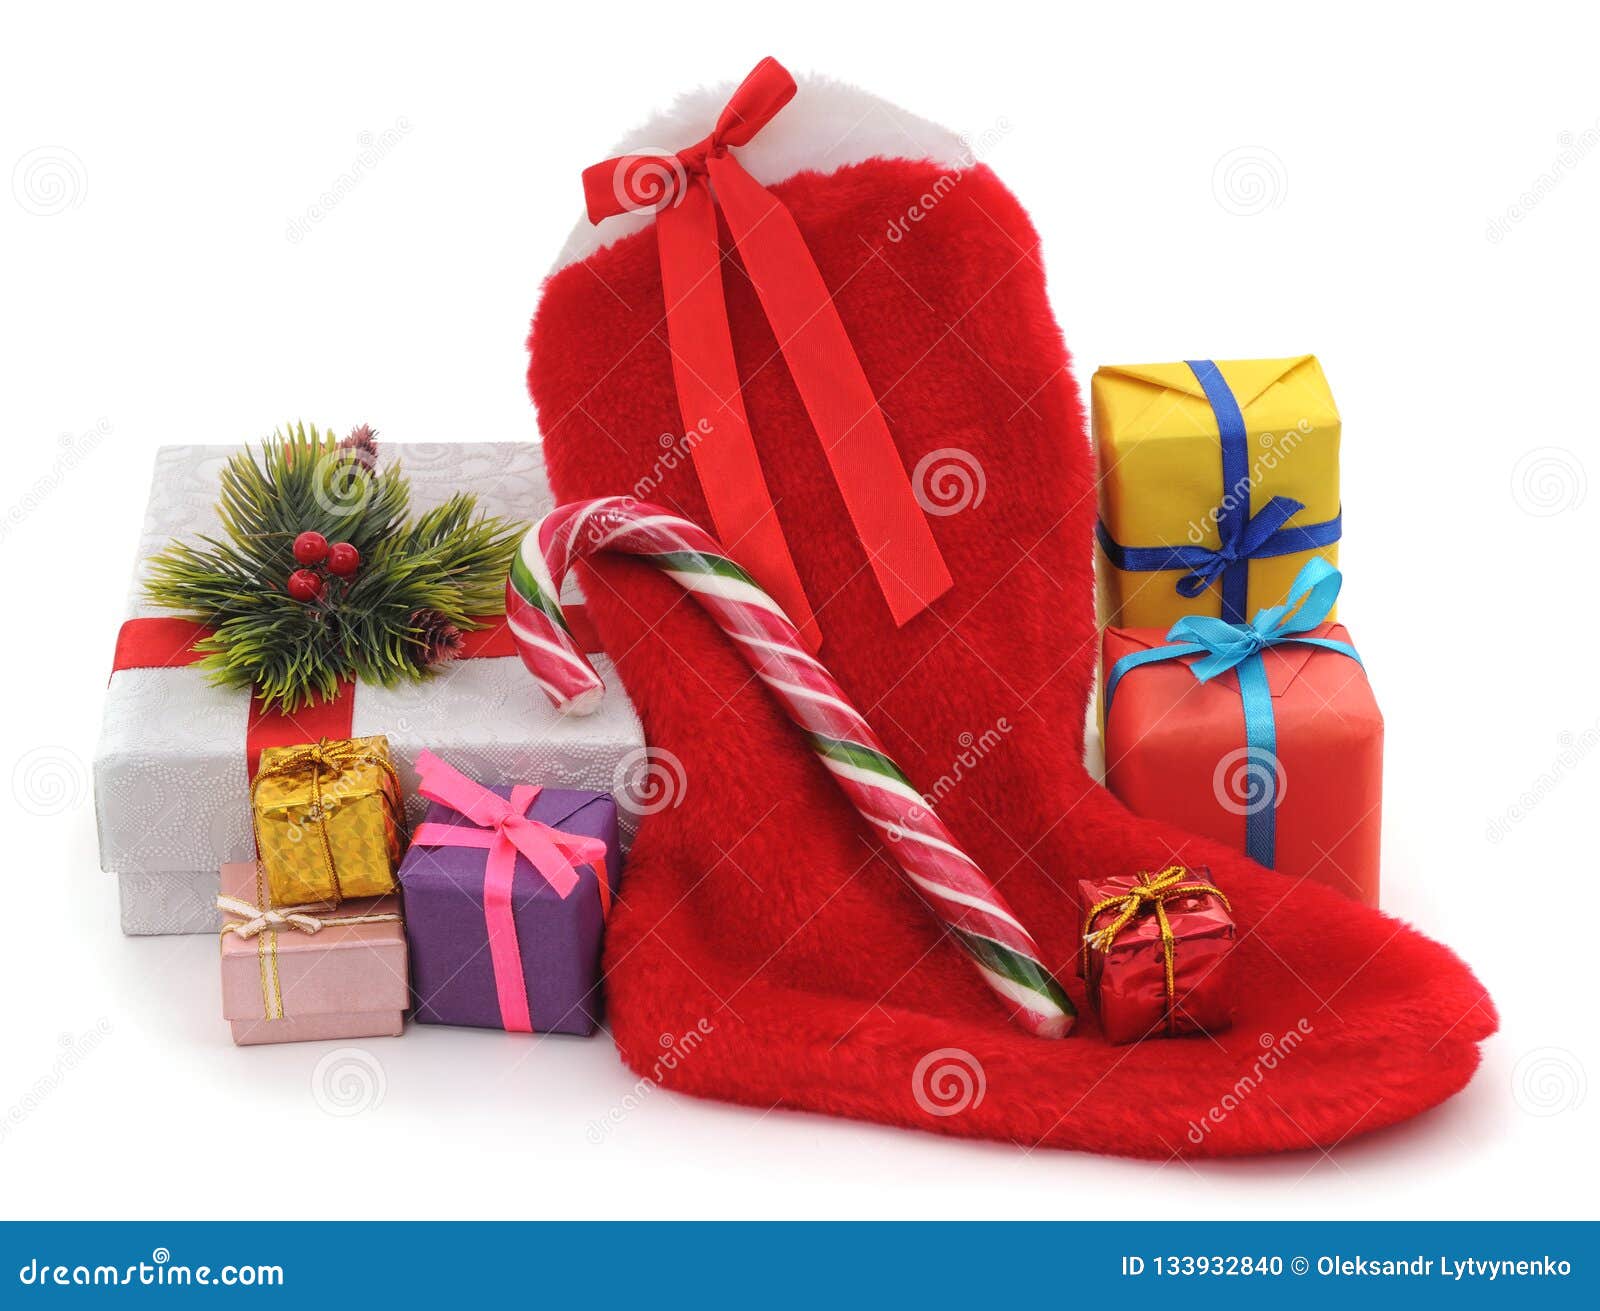 Christmas sock and gifts stock photo. Image of green - 133932840